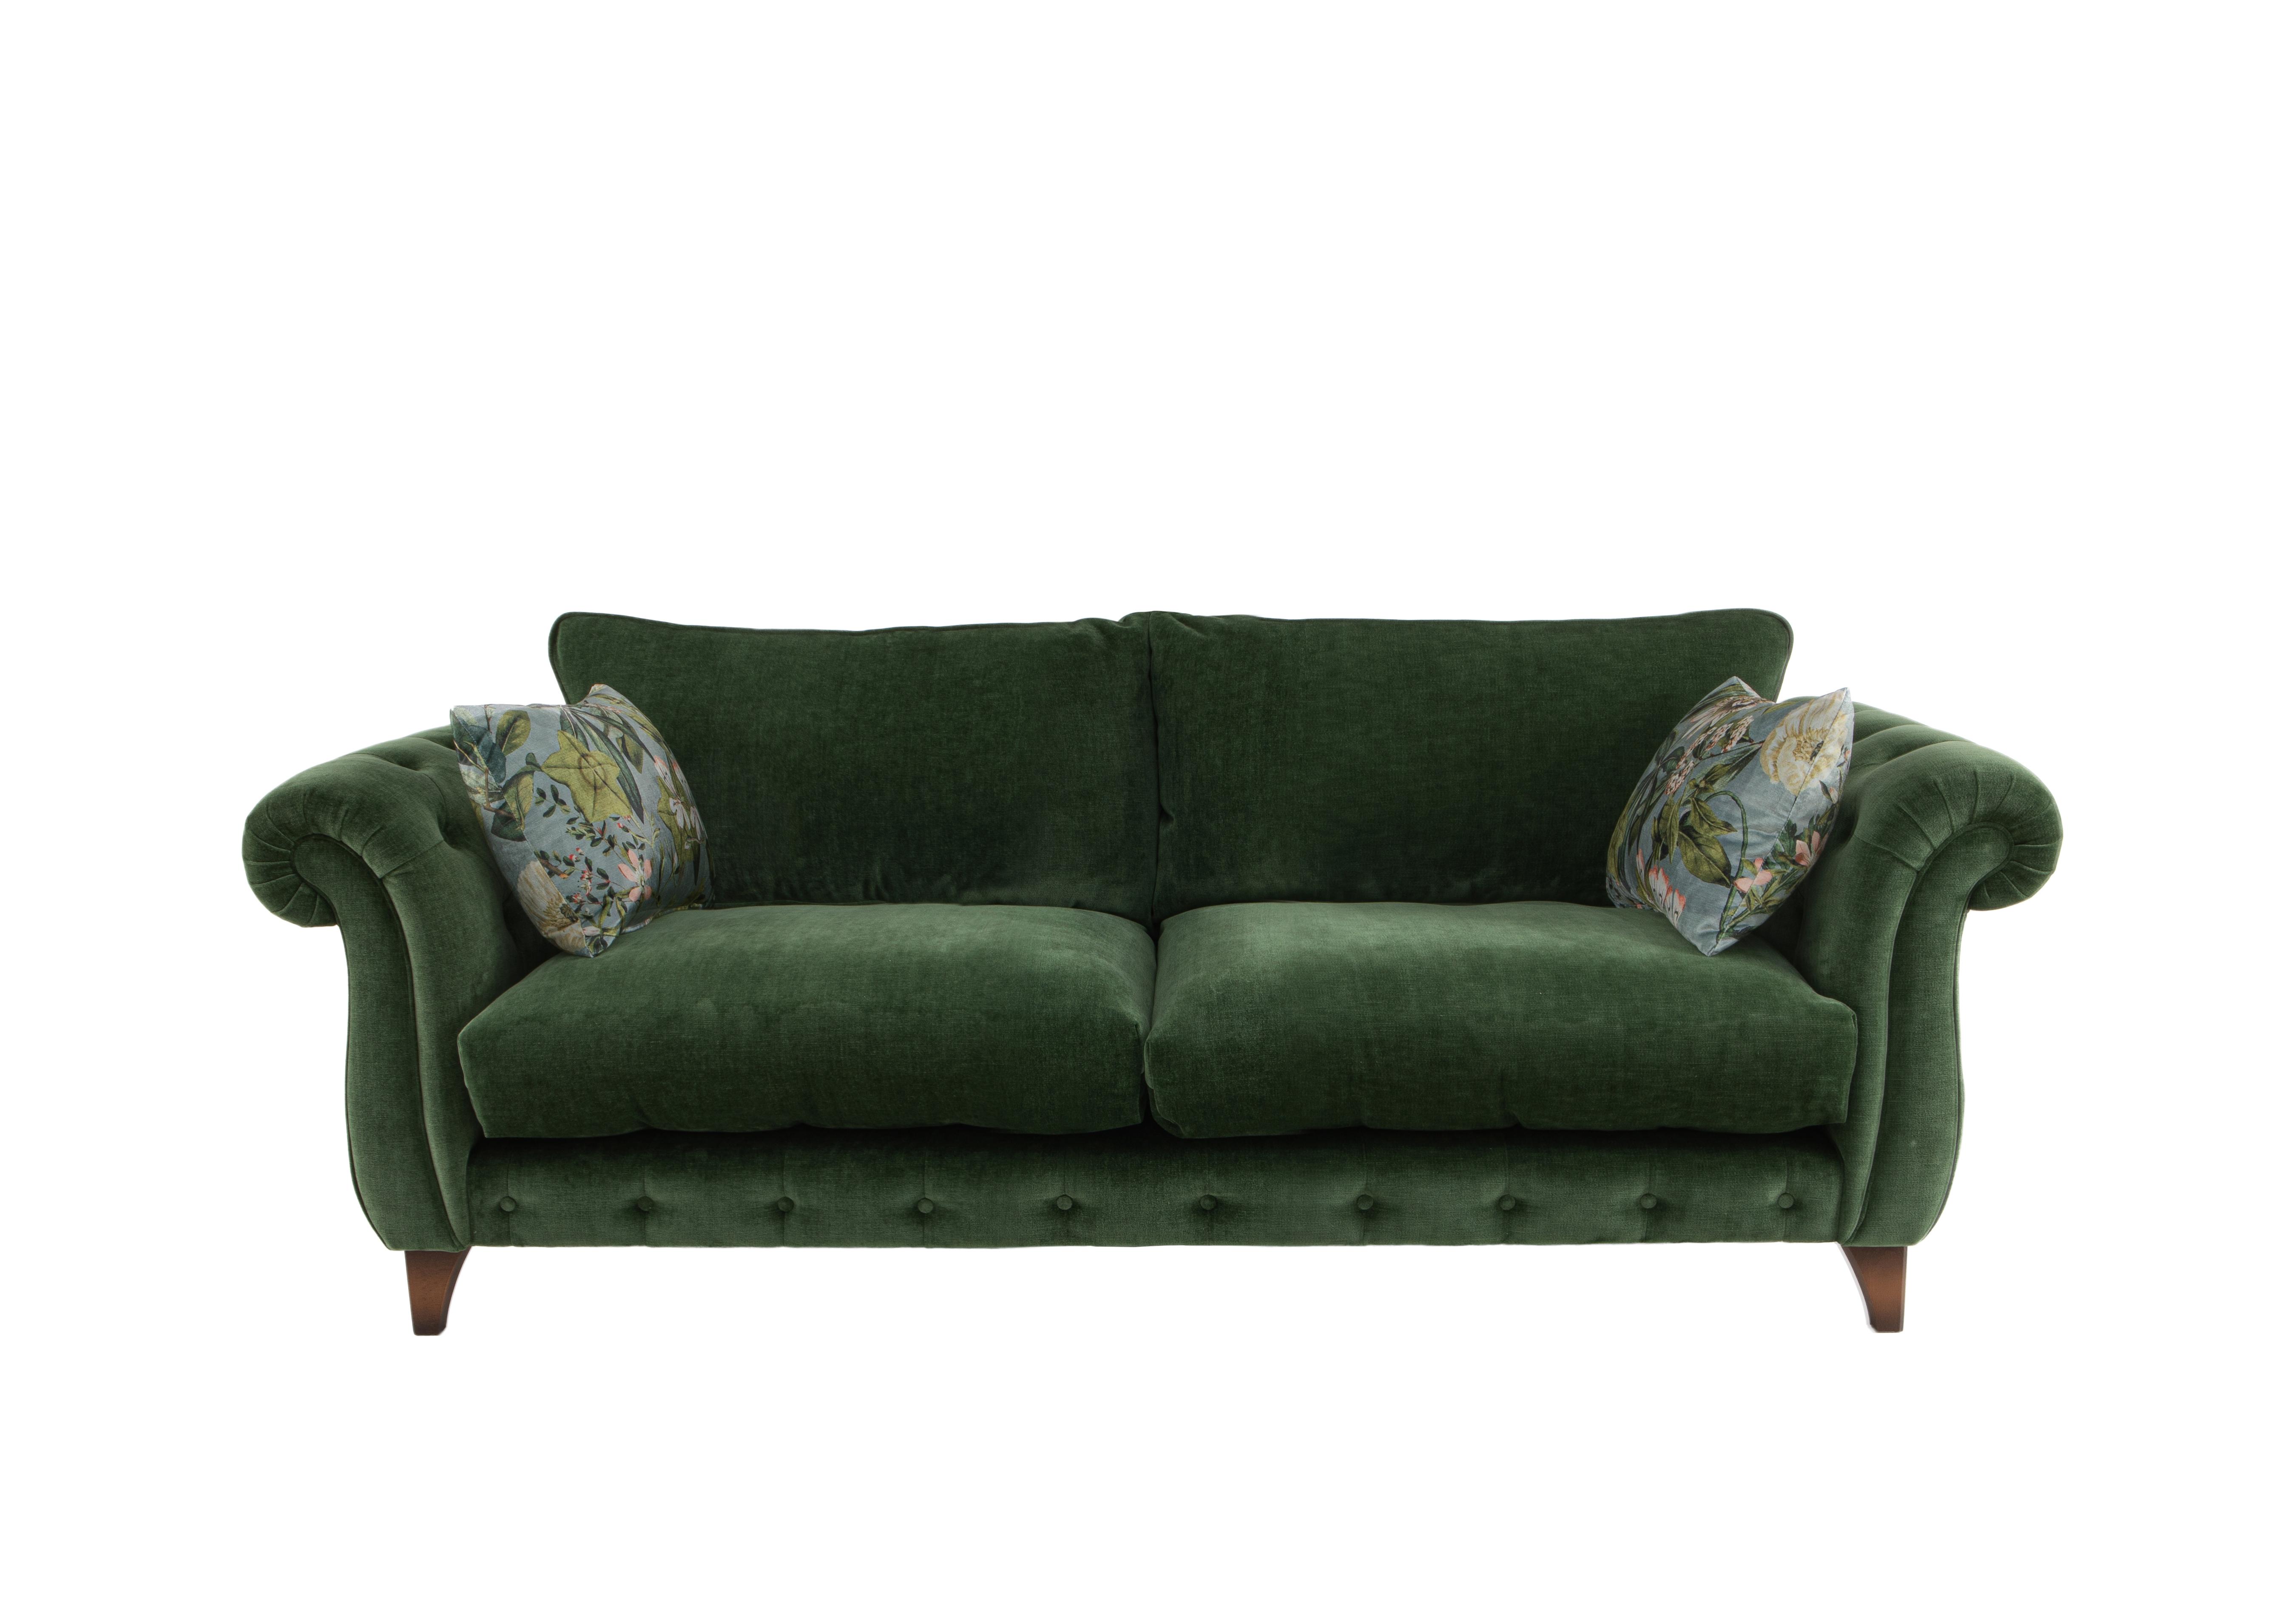 Boutique Palace Fabric 2 Seater Classic Back Sofa in Oasis Parrot on Furniture Village